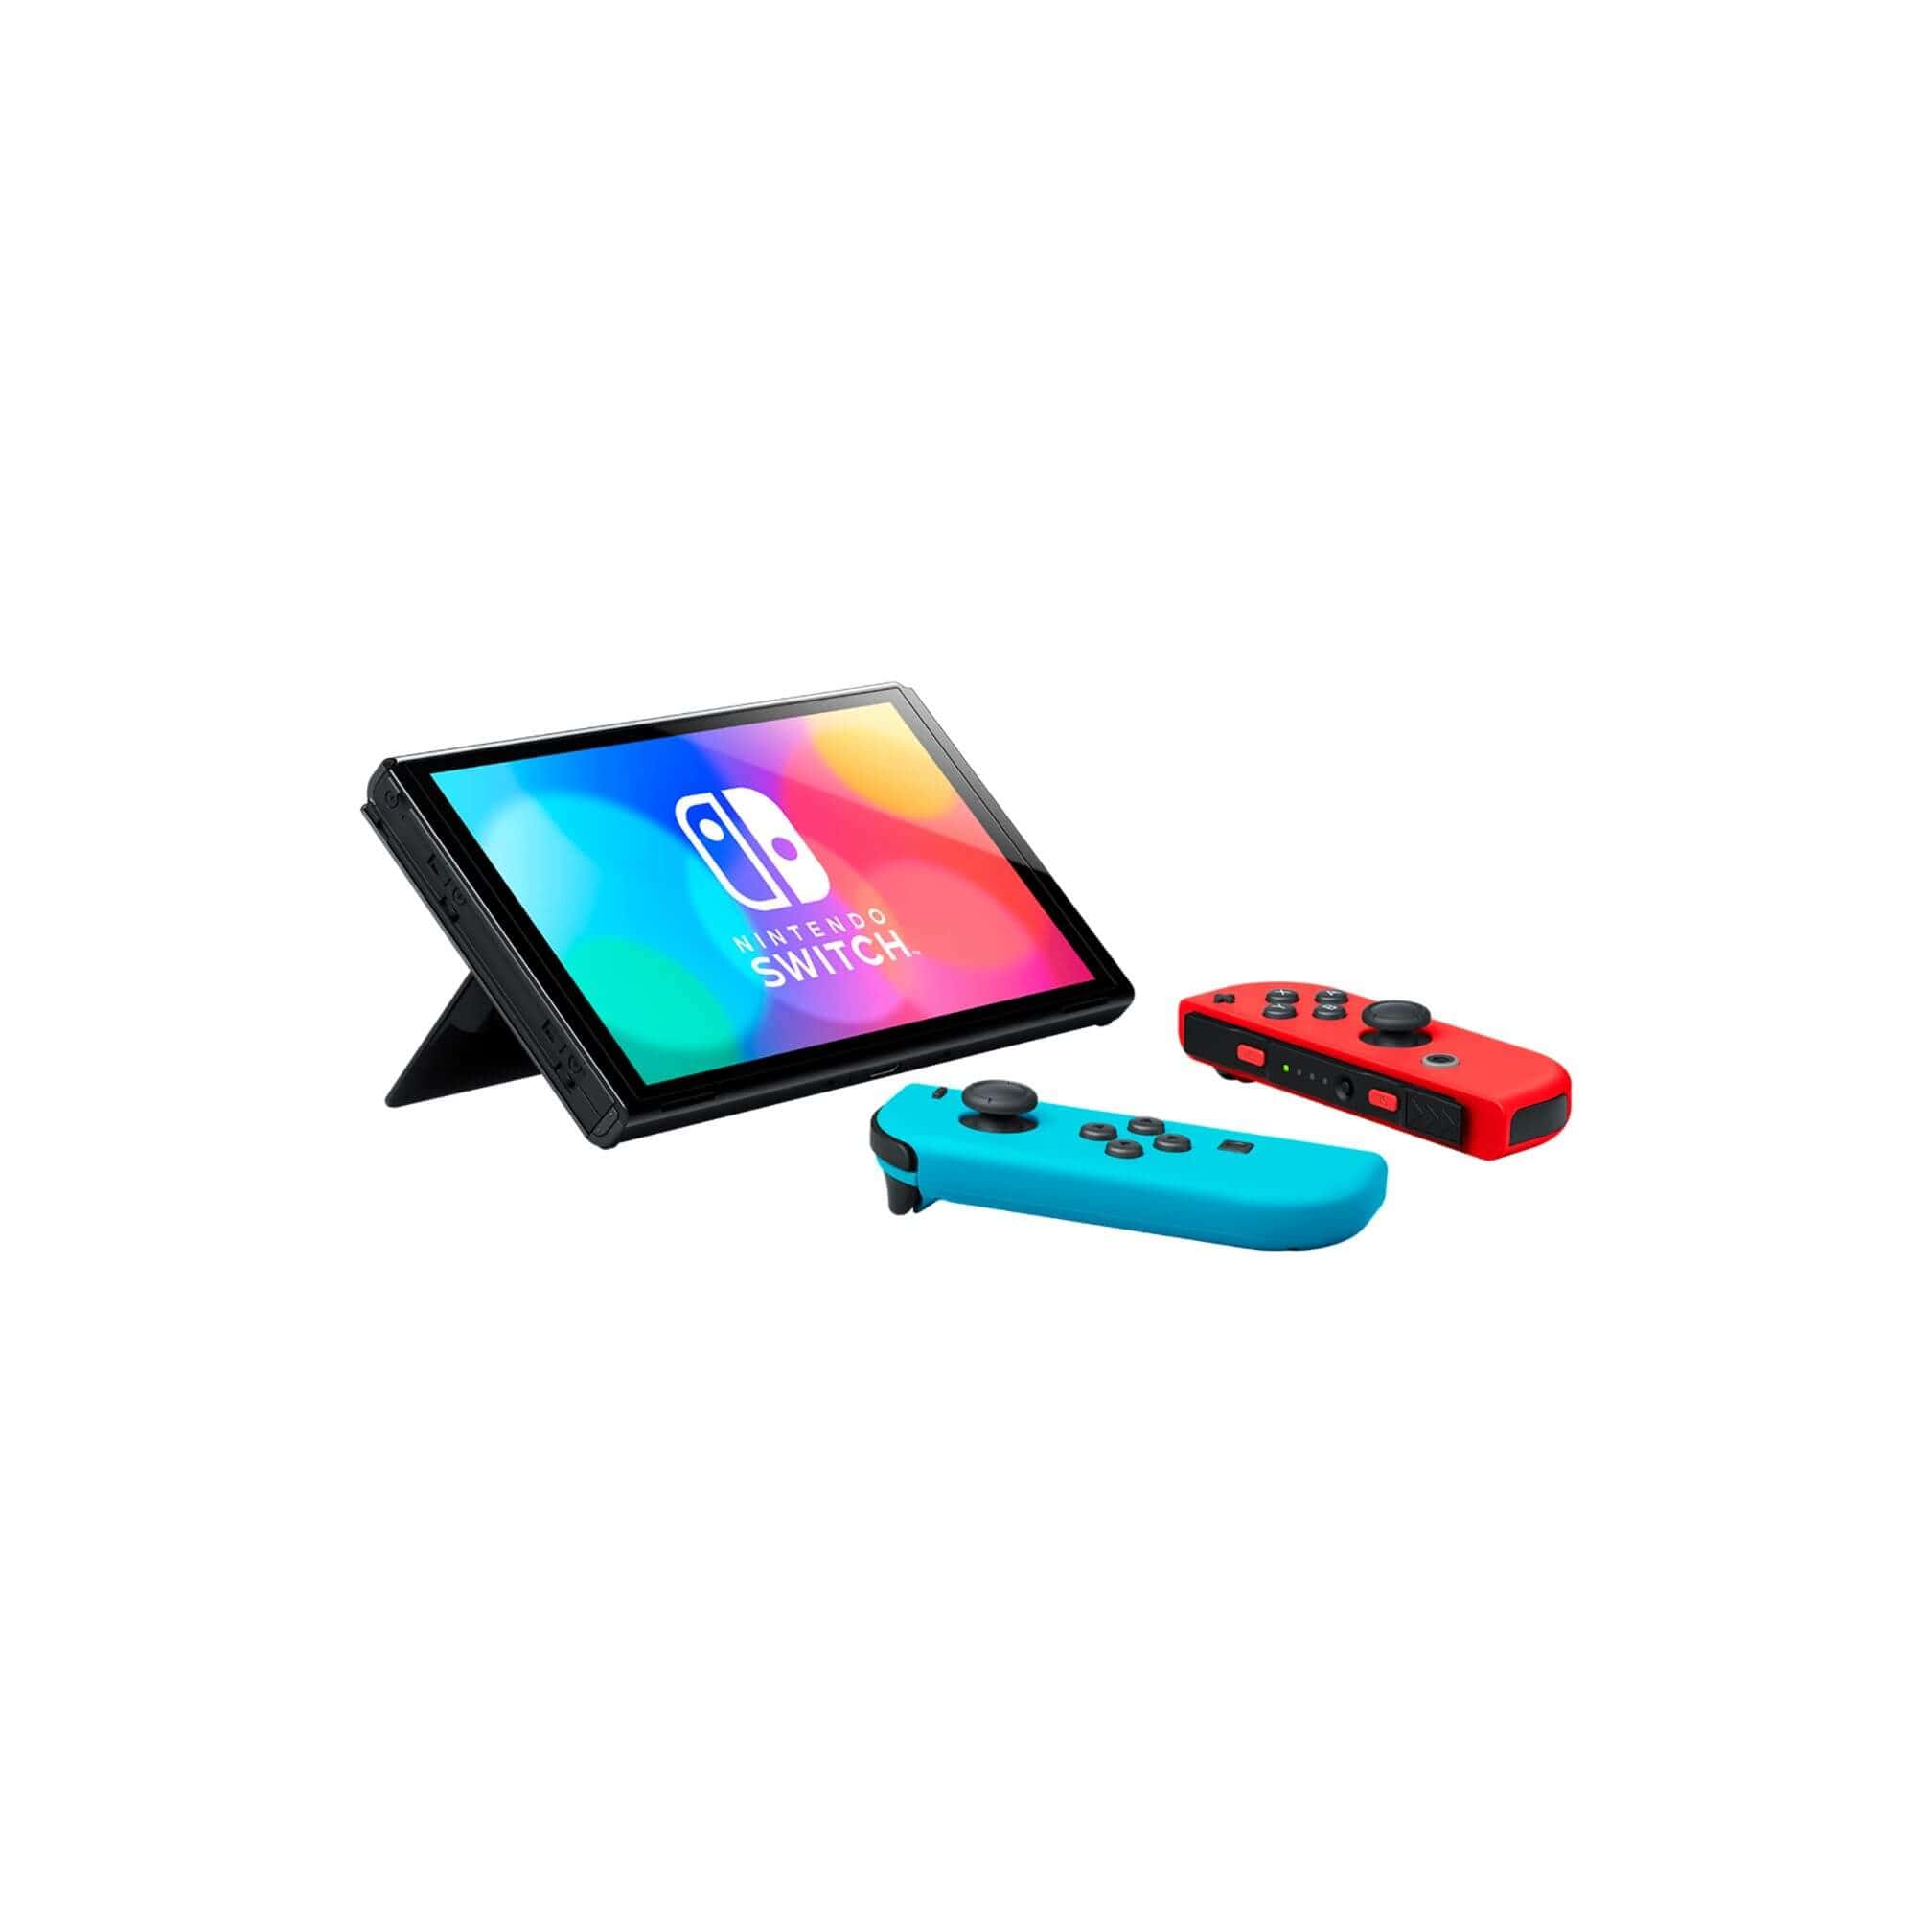 Nintendo Switch with Neon Blue and Neon Red Joy-Con with Switch